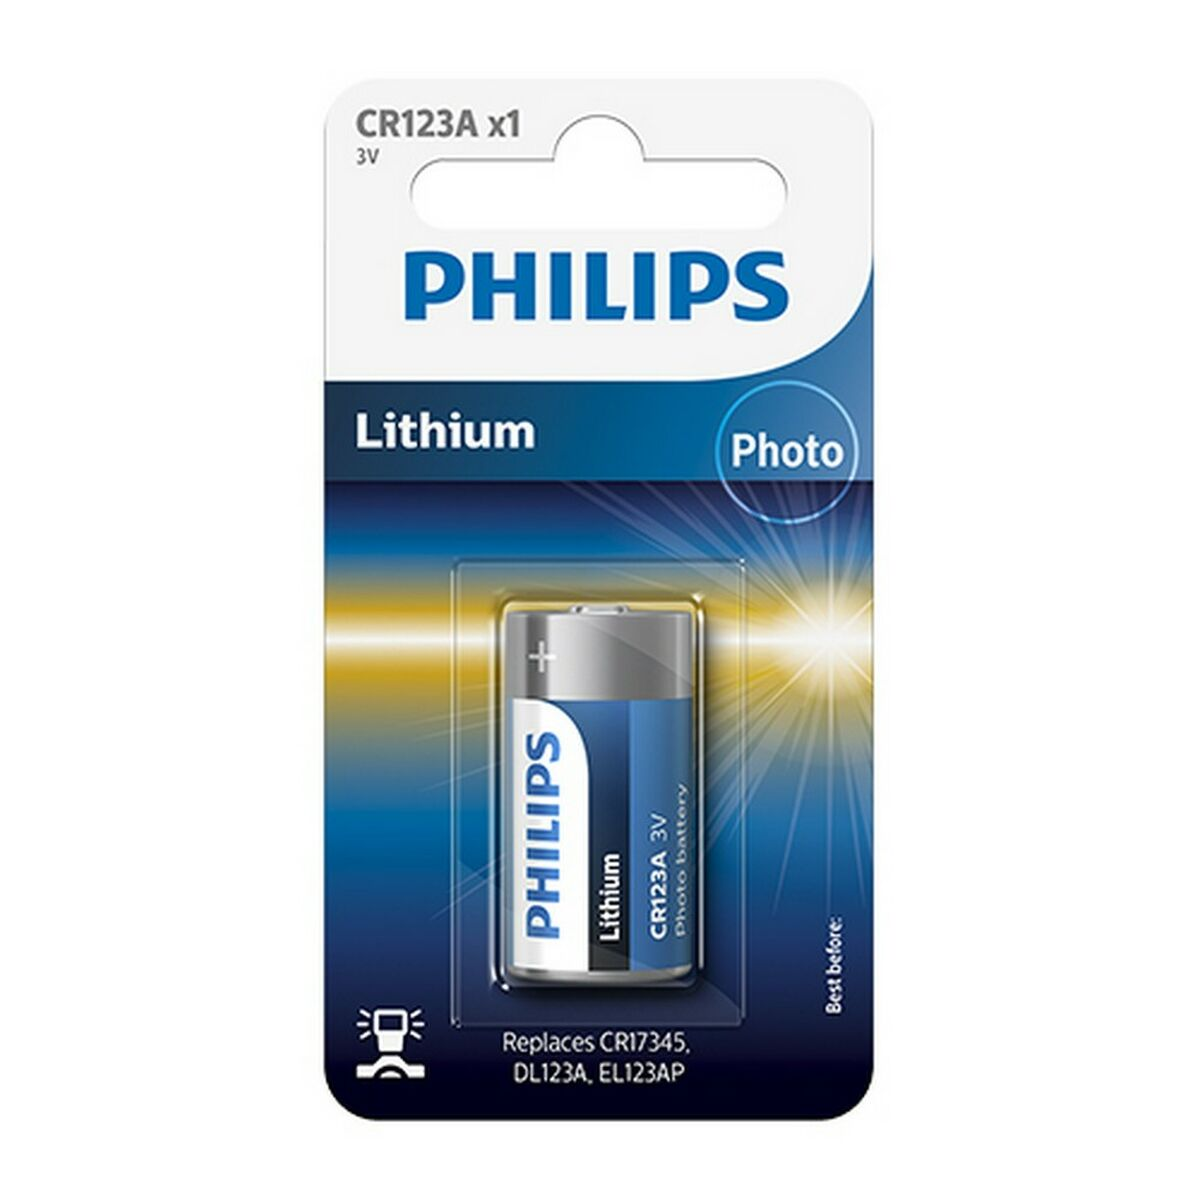 CR123A/97 Lithium-Batterie Lithium-Knopfzelle PHILIPS